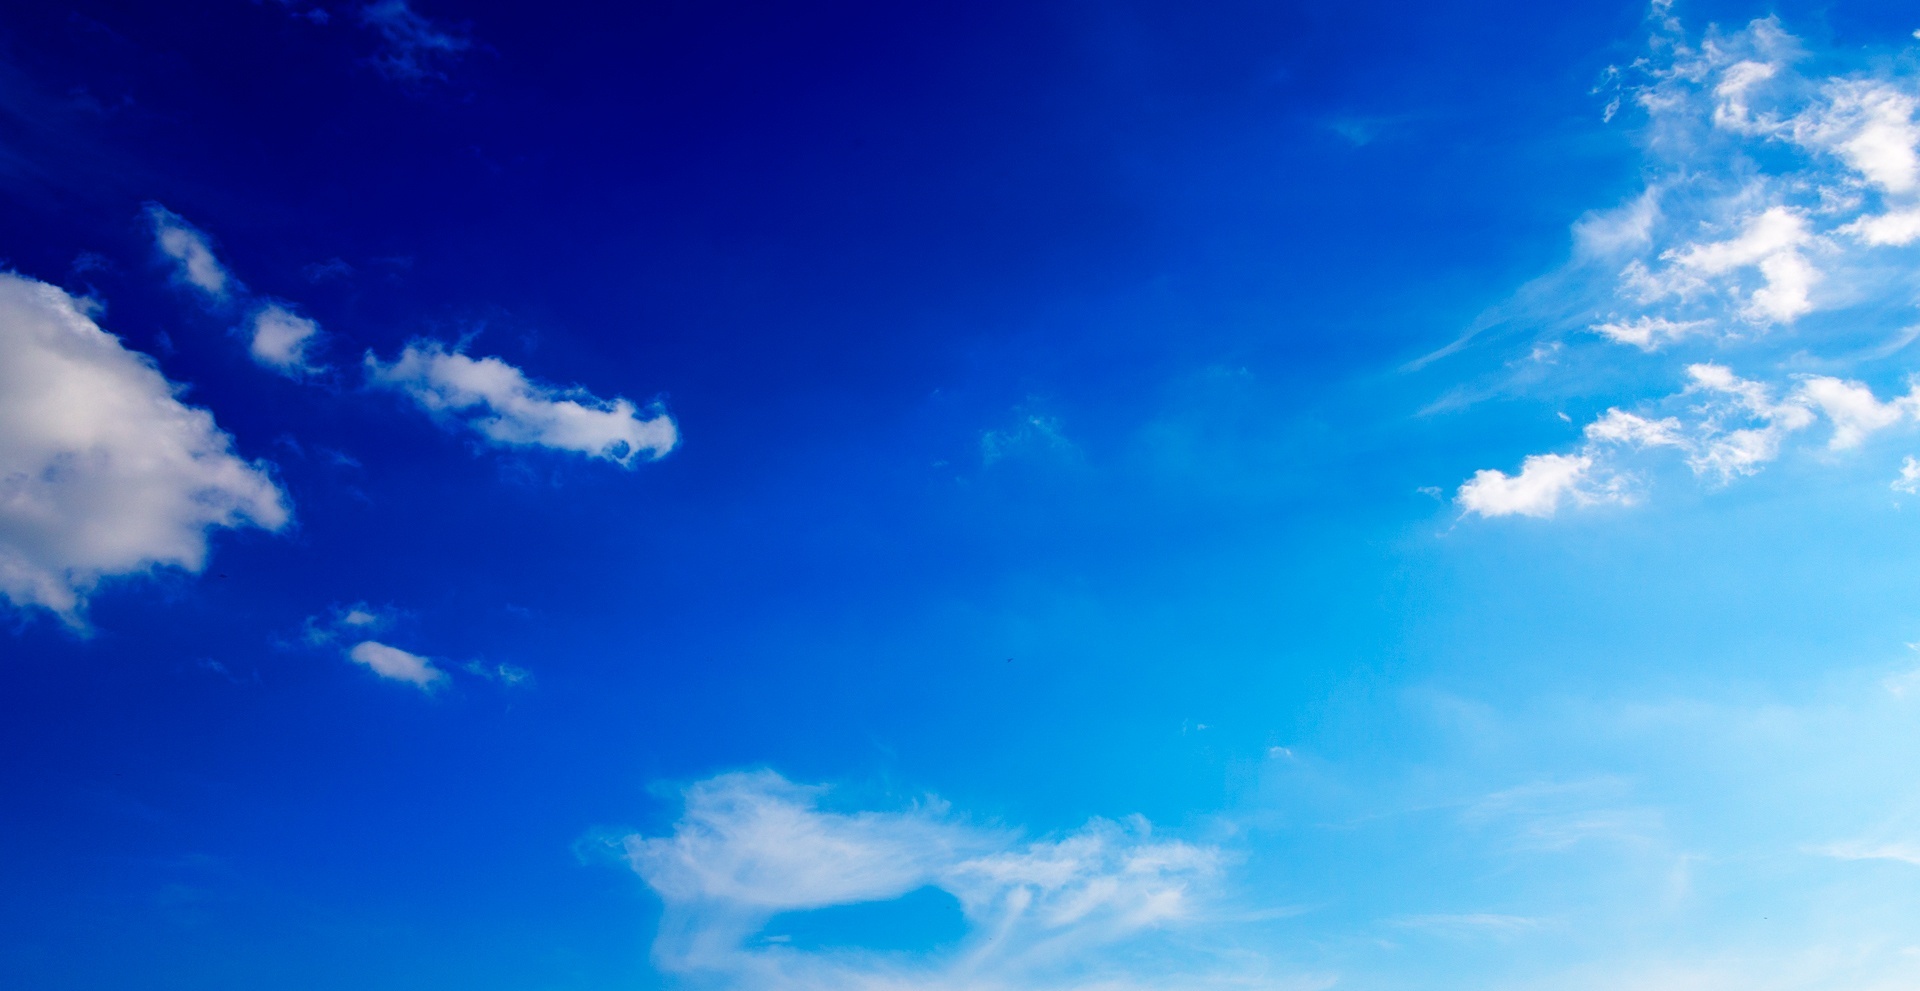 Wallpaper Background Blue Sky image gallery